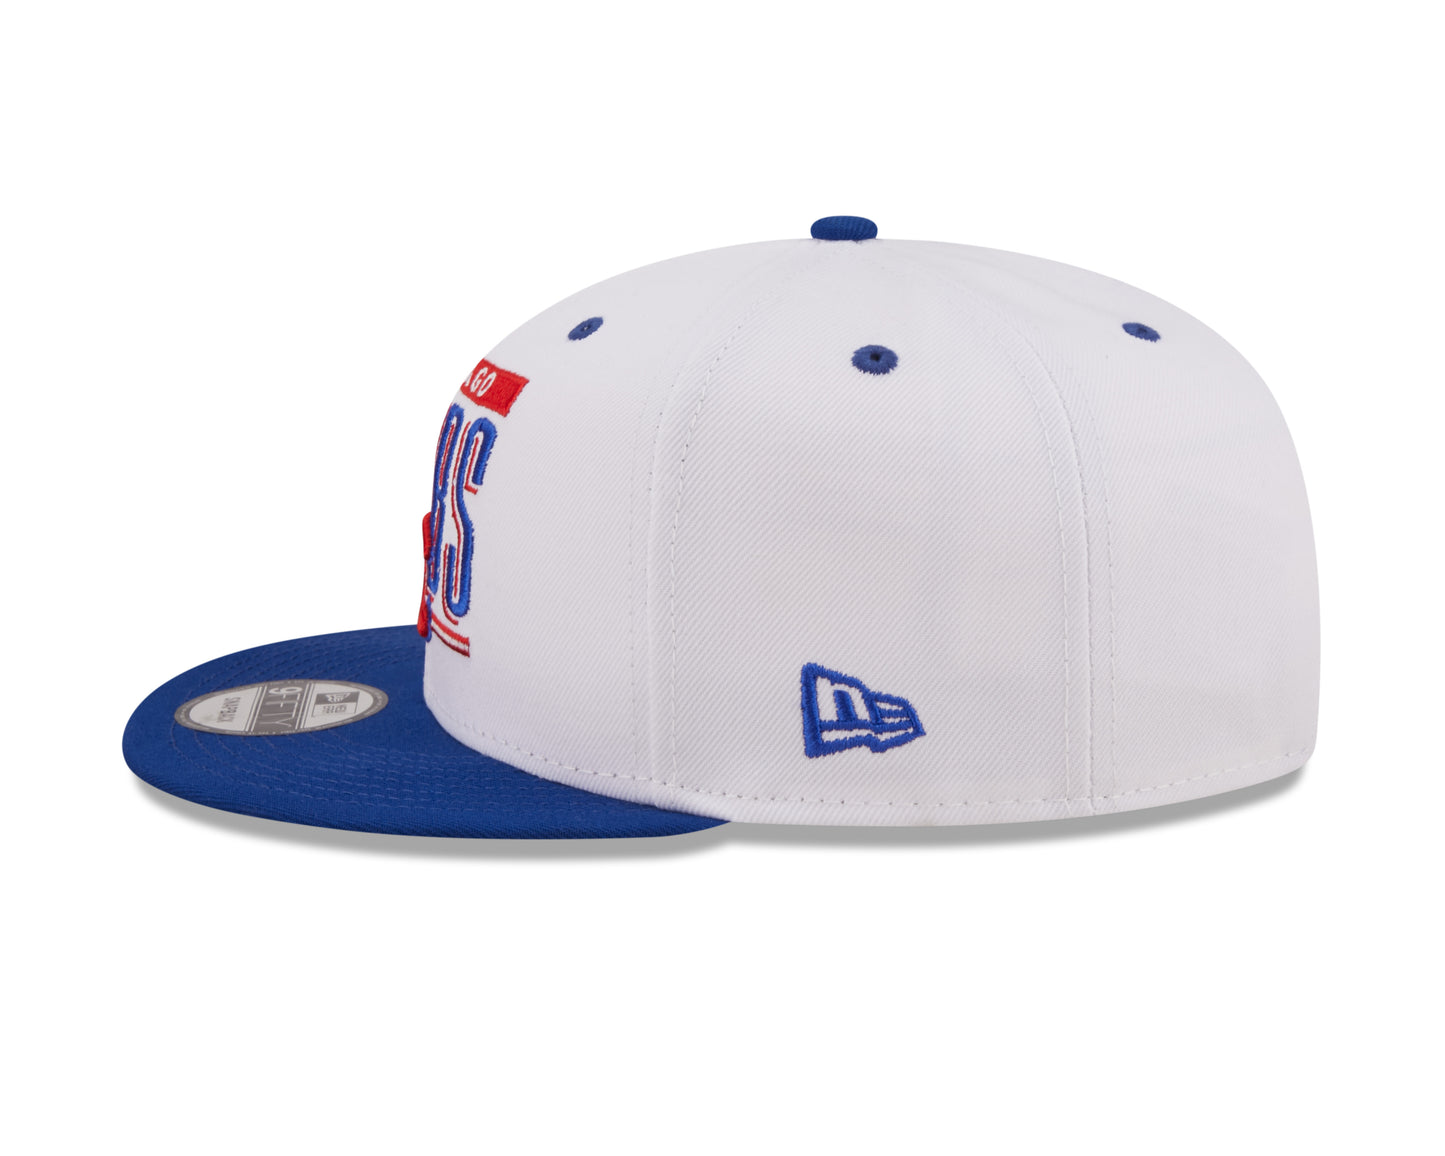 Chicago Cubs New Era Retro Title 9FIFTY Snapback Hat - White/Blue